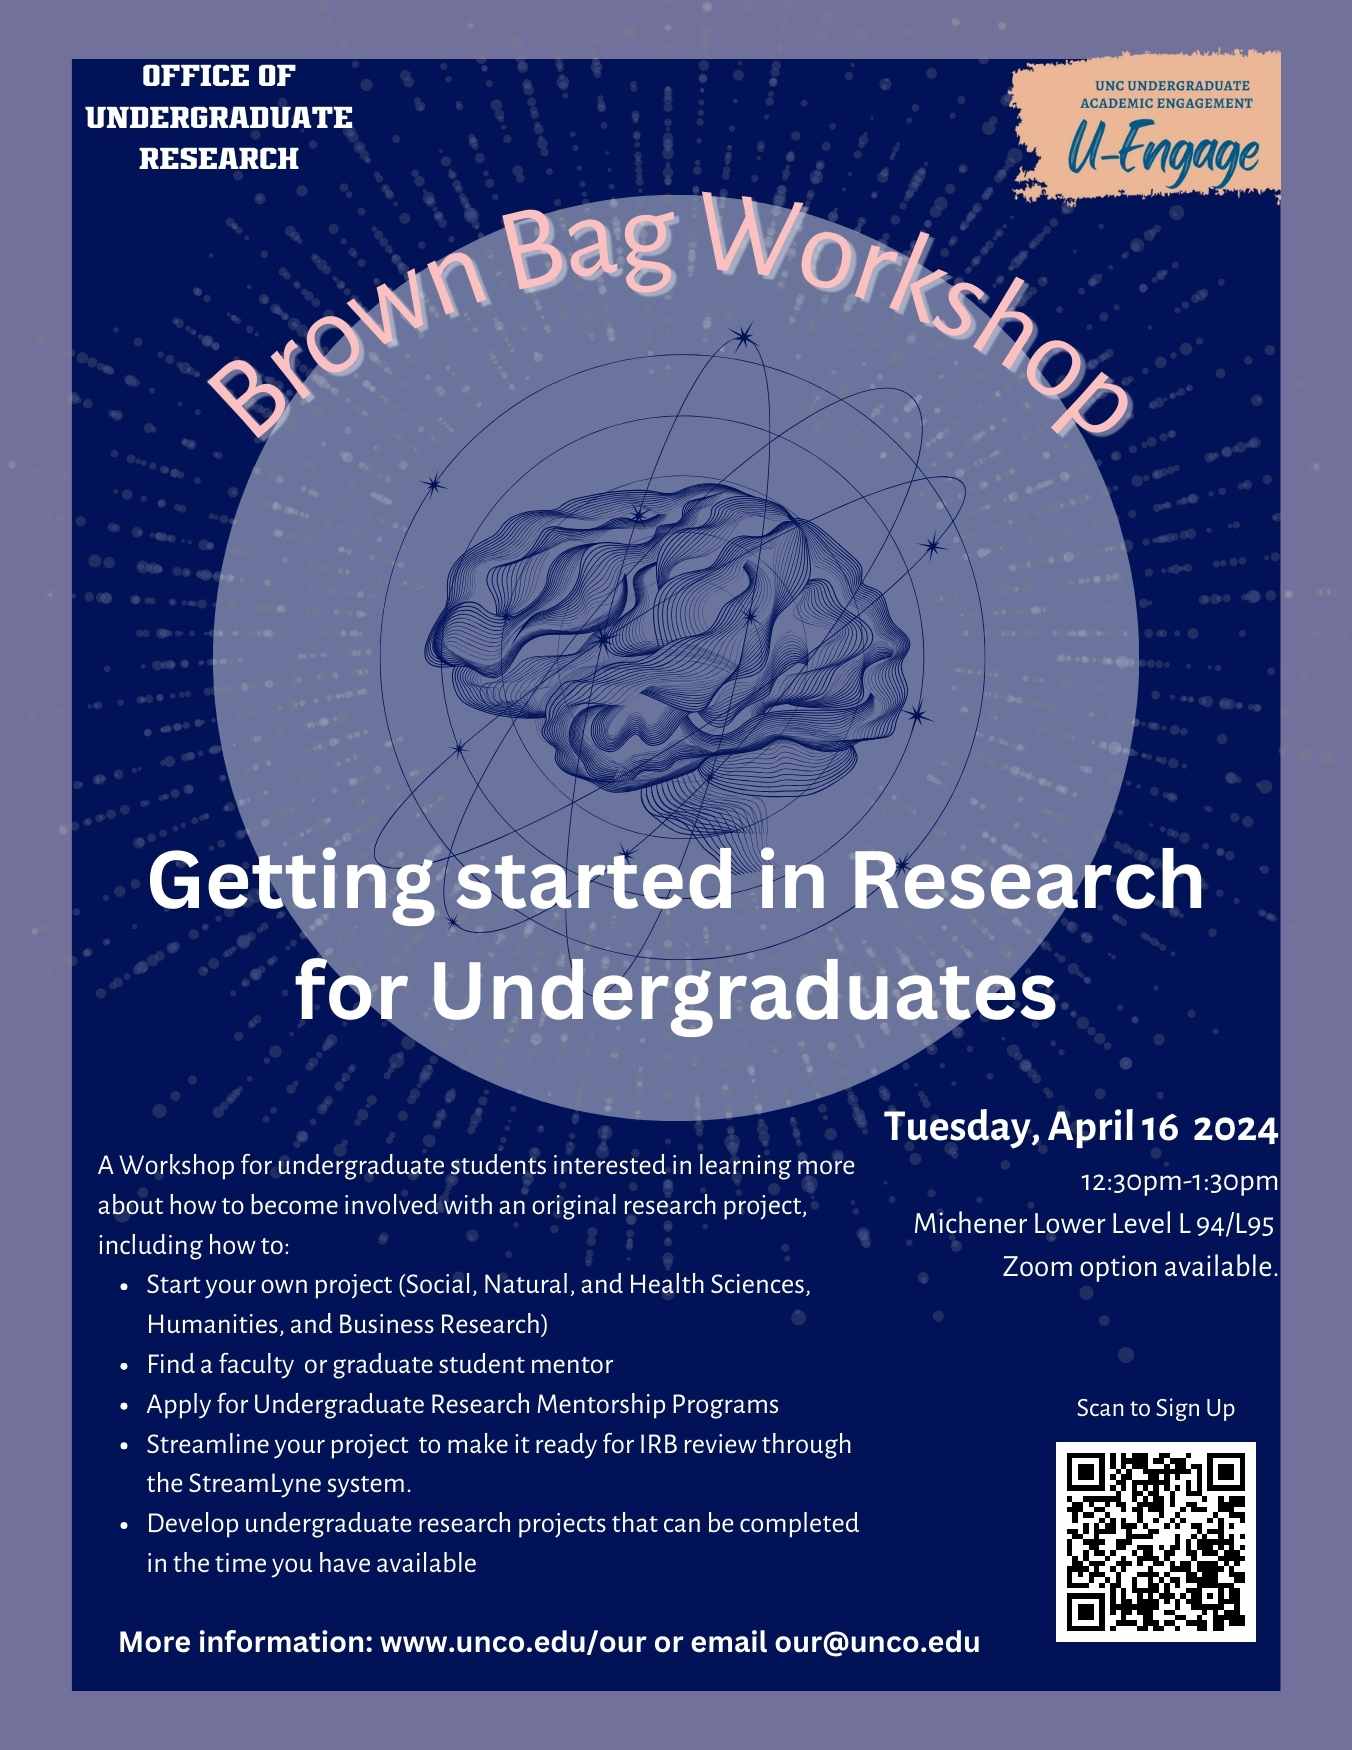 Flyer titled Brown Bag Workshop - getting started in research